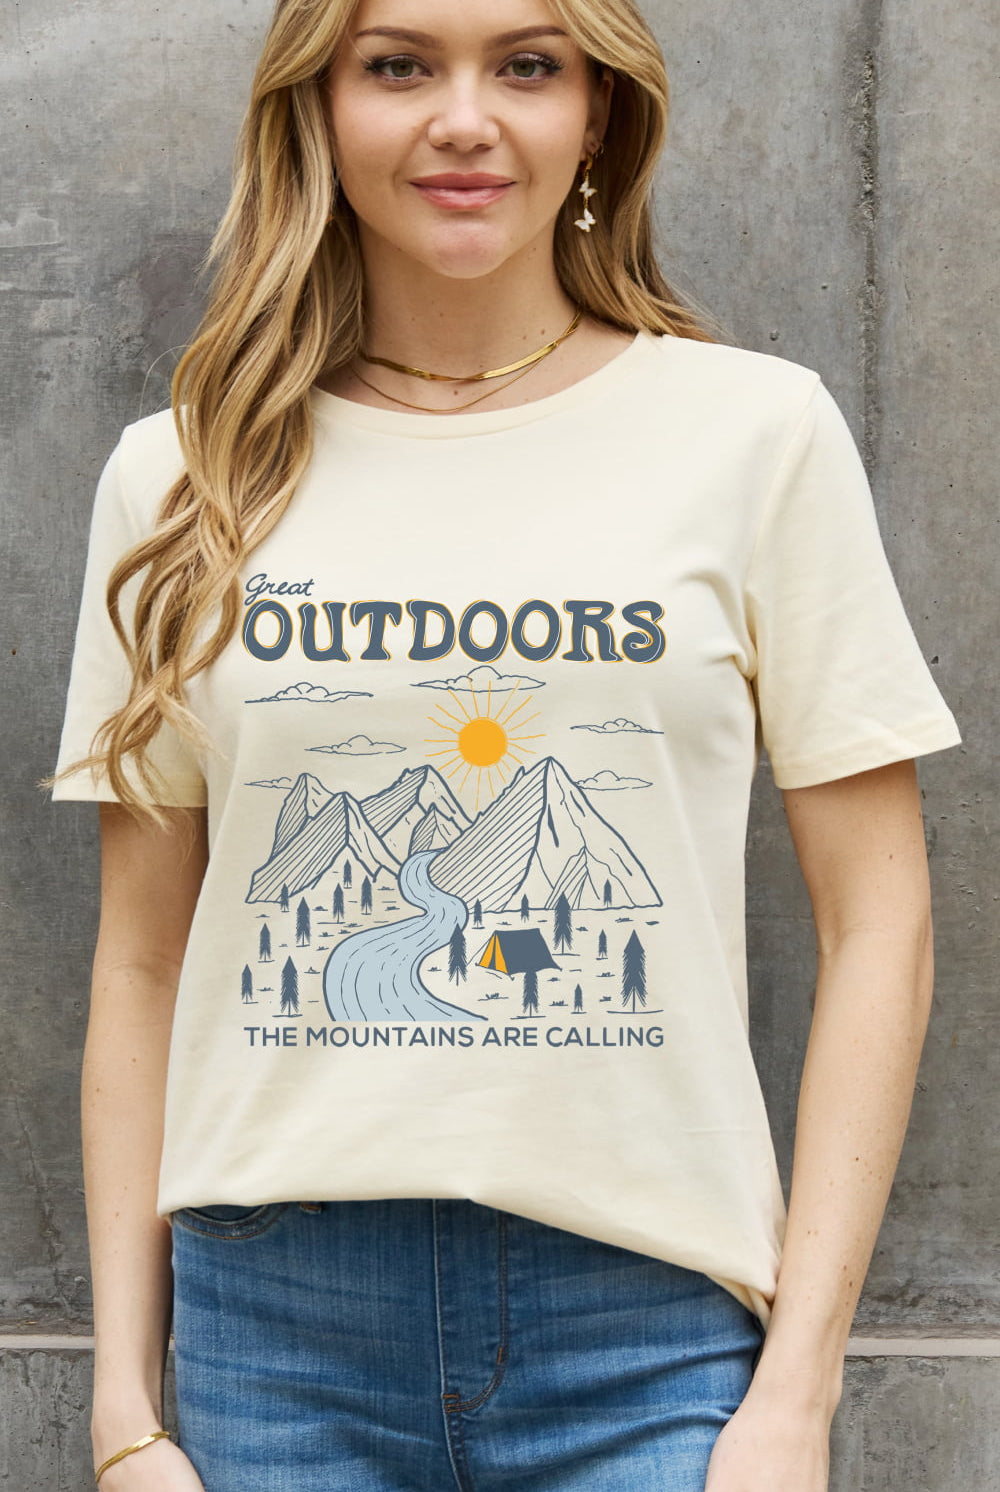 Rosy Brown Simply Love Full Size GREAT OUTDOORS Graphic Cotton Tee Tops